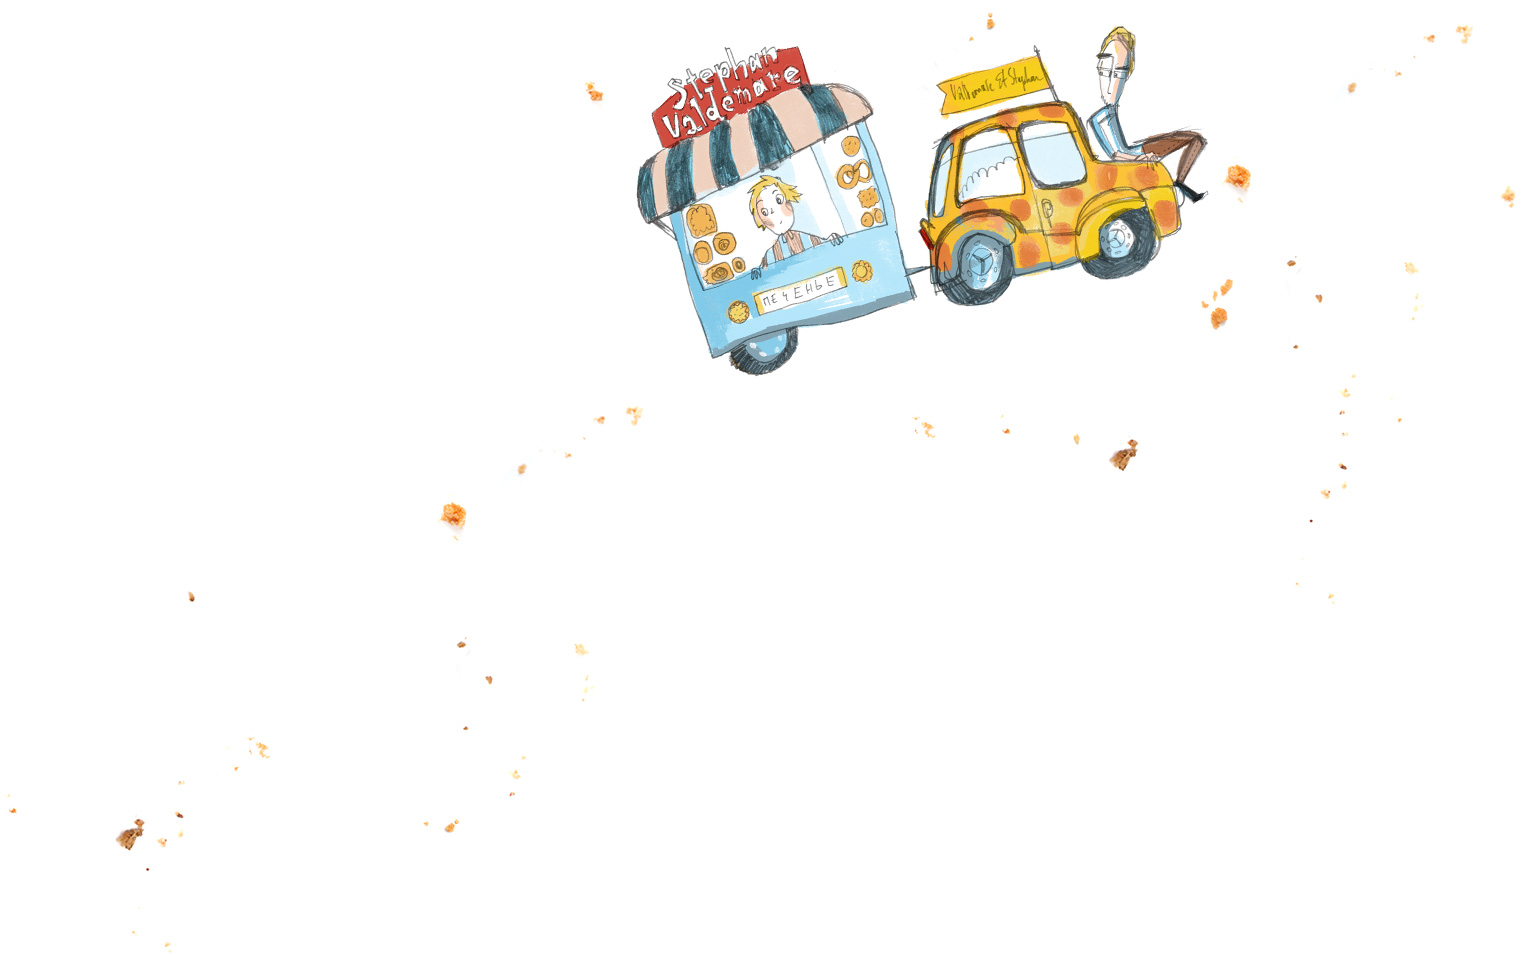 some bread crumbs with a car illustration